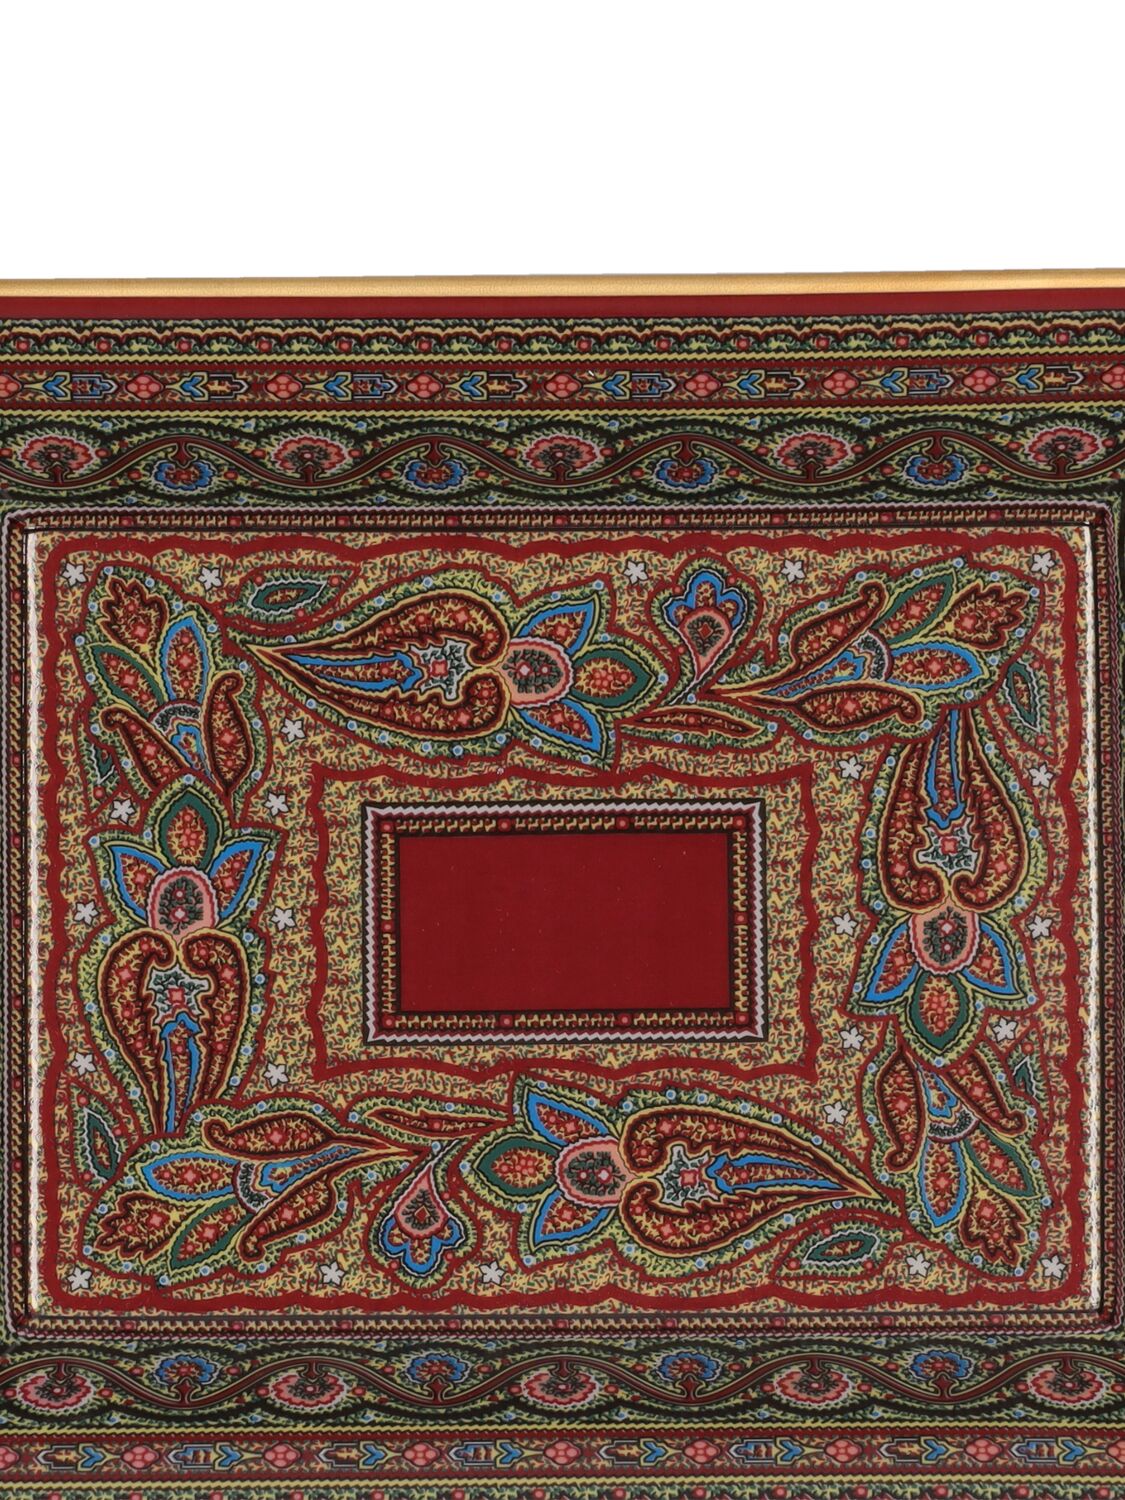 Shop Etro Amanti Porcelain Valet Tray In Red